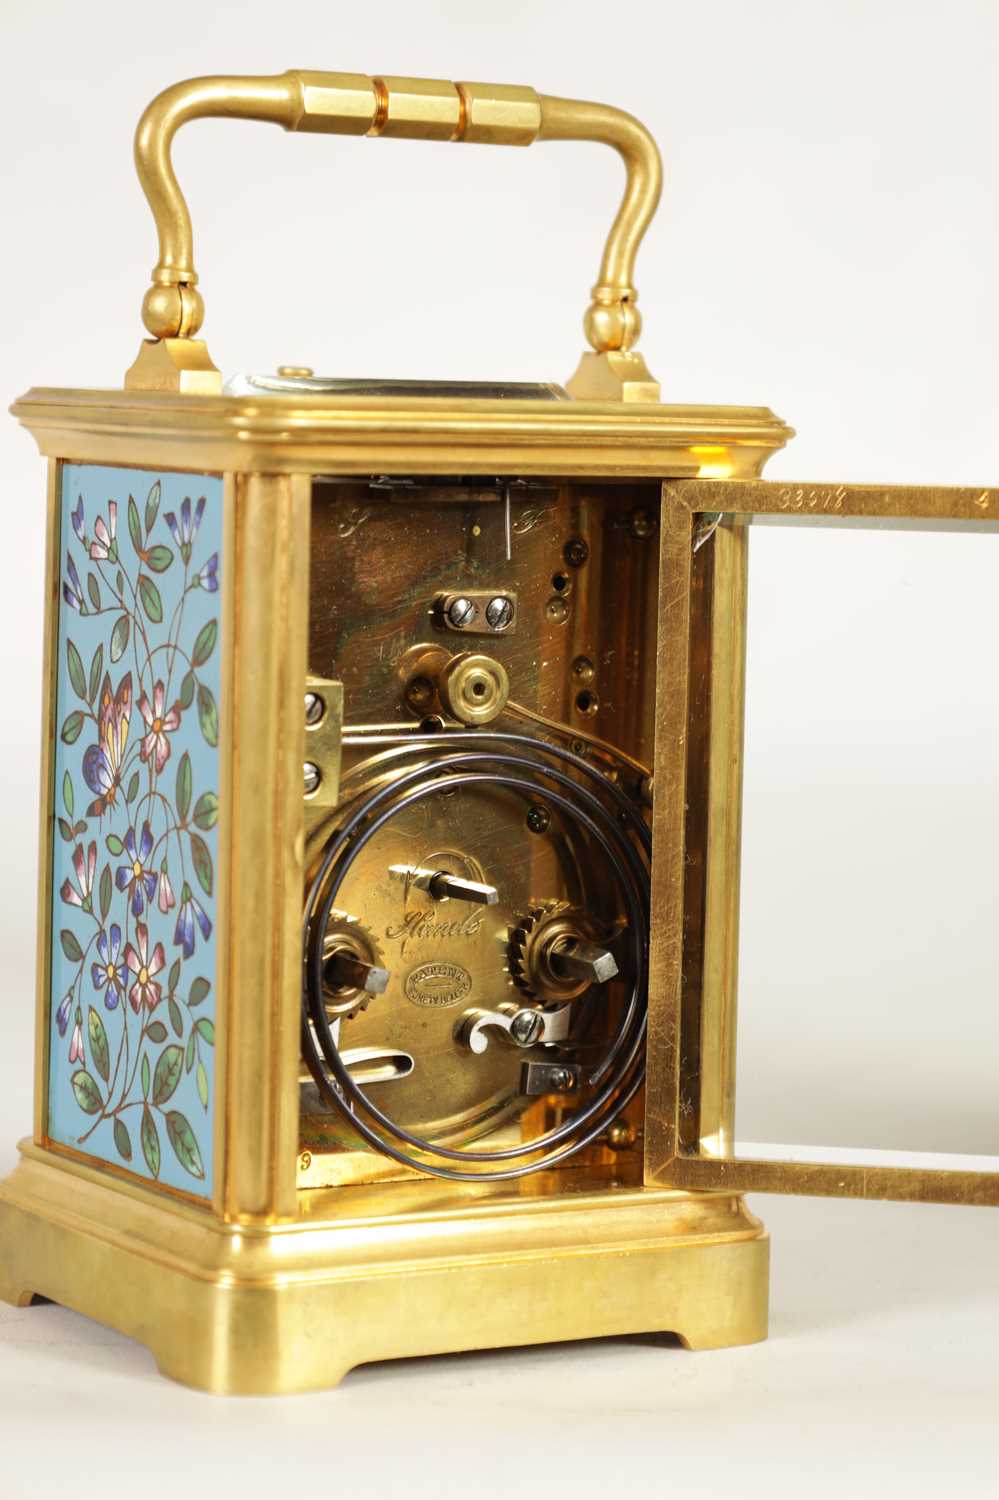 A LATE 19TH CENTURY FRENCH GILT BRASS AND CLOISONNE ENAMEL REPEATING CARRIGE CLOCK - Image 5 of 9